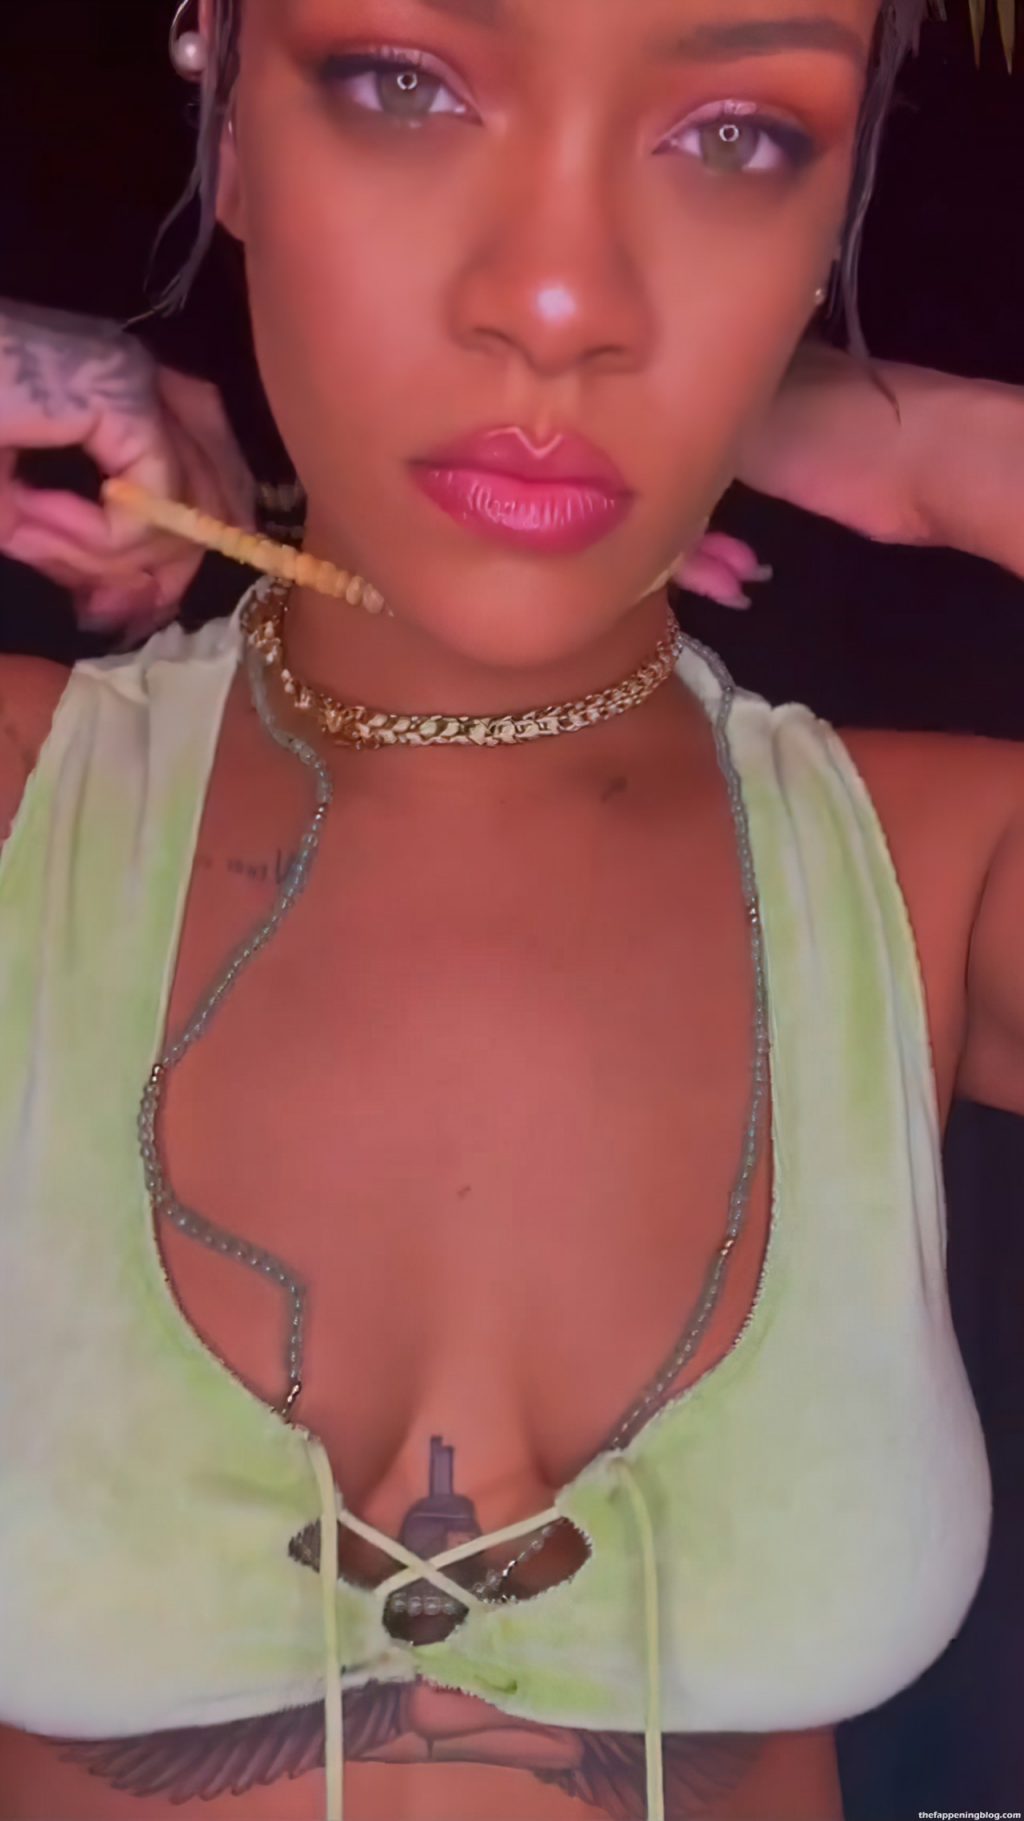 Rihanna Displays Her Tits and Butt in Green Lingerie (14 Pics + GIFs &amp; Video)